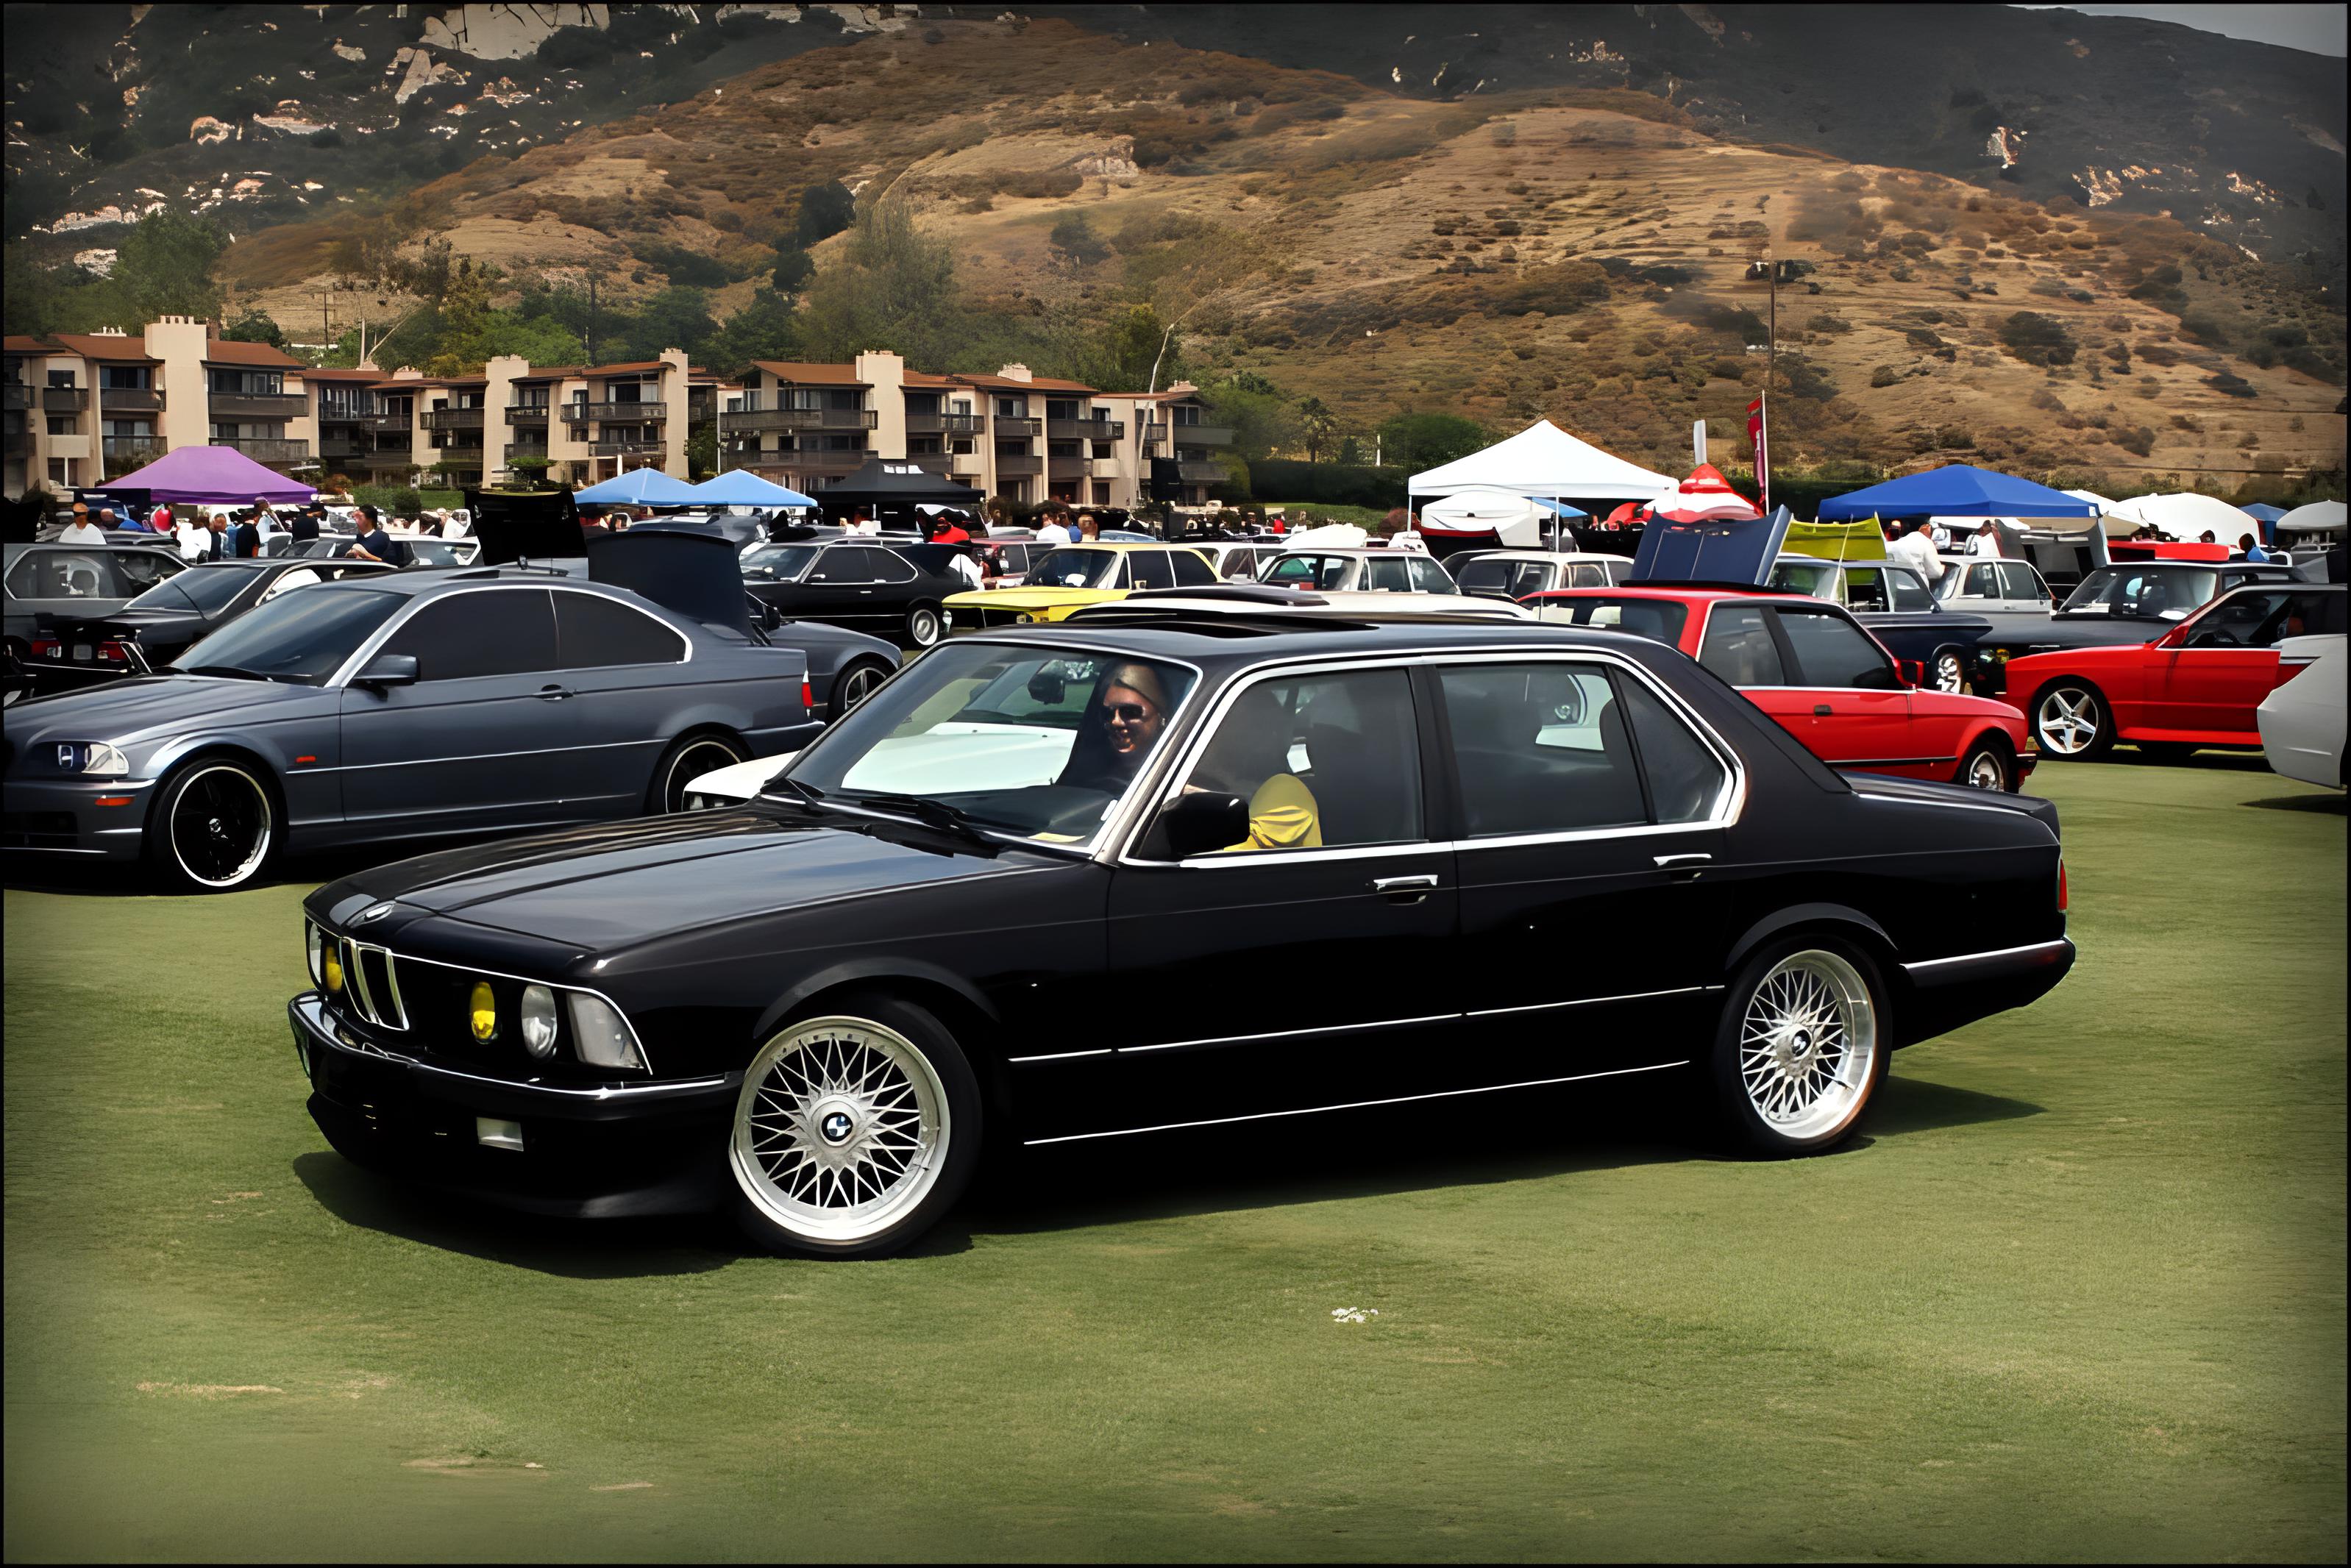 BMW 745i Turbo technical details, history, photos on Better Parts LTD